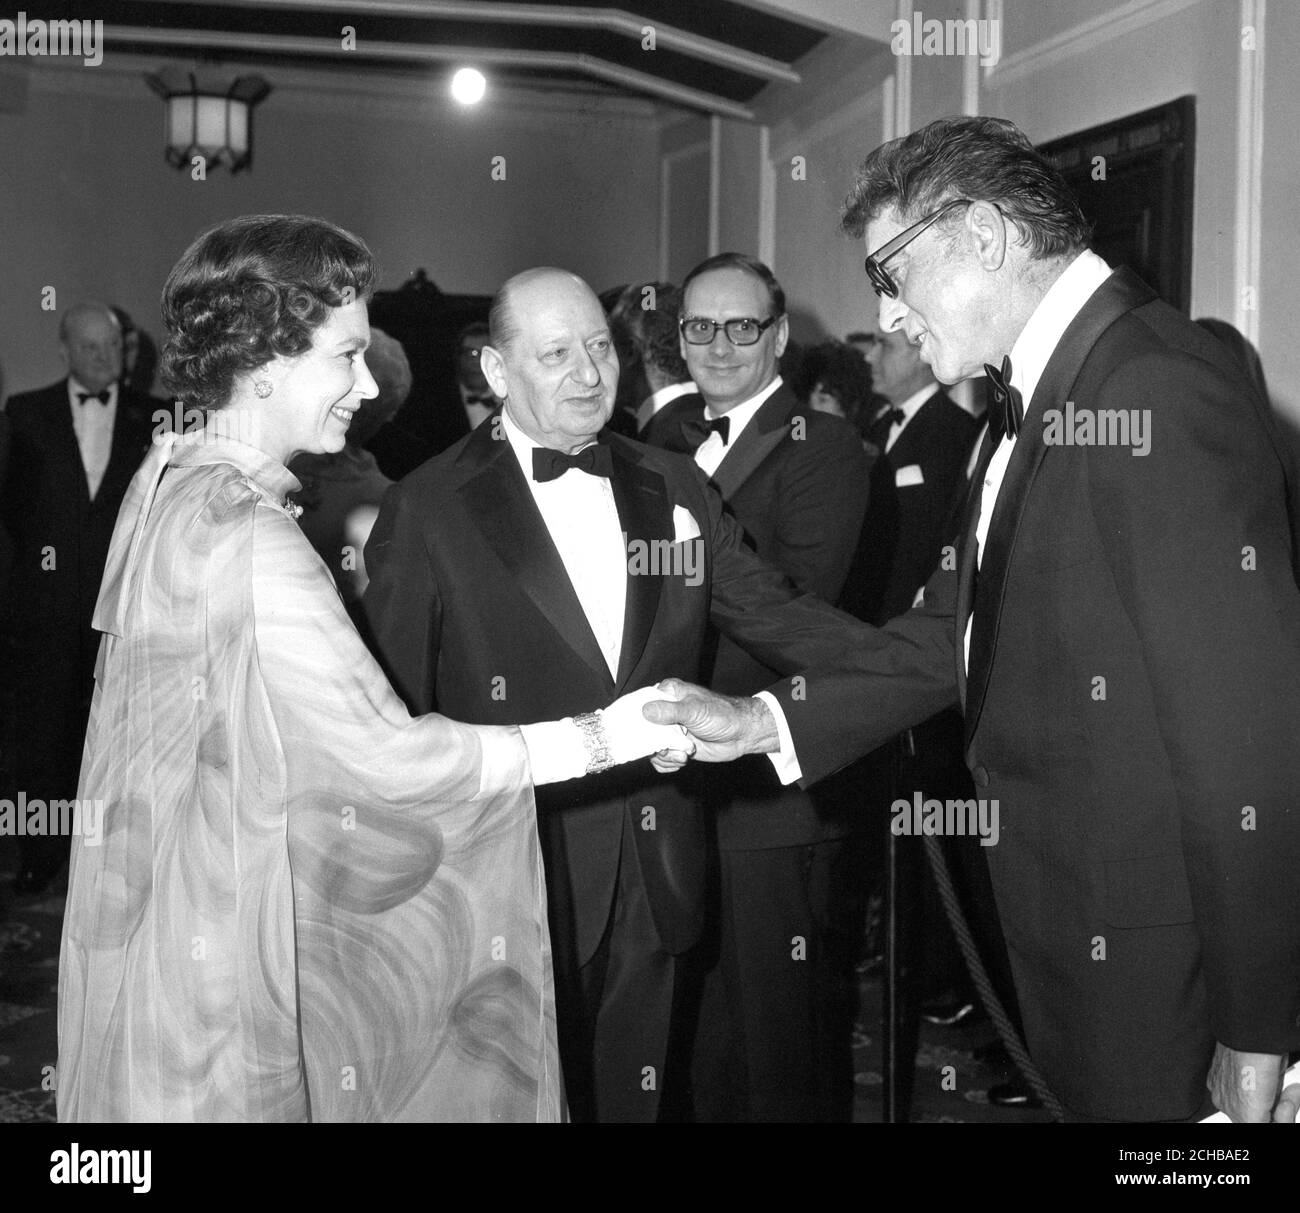 Queen Elizabeth II shakes hands with Hollywood's Burt Lancaster at the Dominion Cinema in London at a Royal premiere of his new film Moses. Looking on is Sir Lew Grade, who presents the film which is released in the UK by Scotia-Barber Distributors. The premiere aids the British Olympics Appeal Fund. Stock Photo